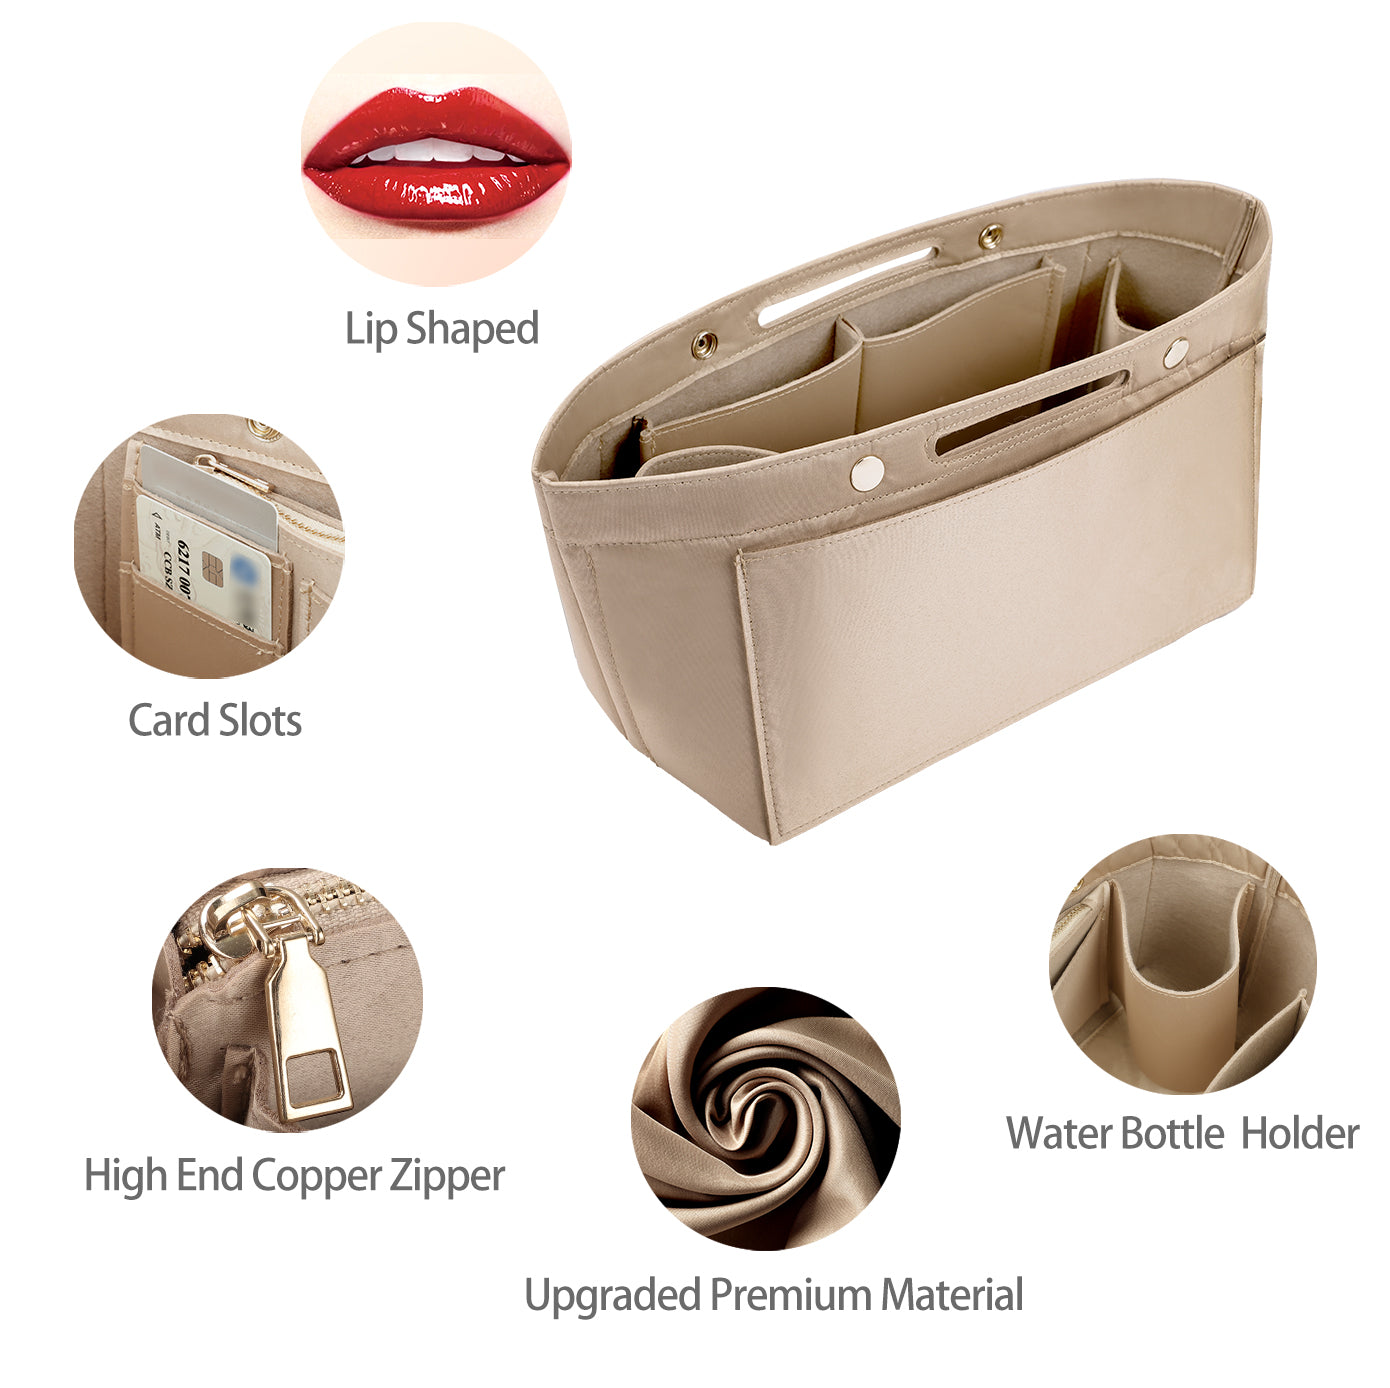 Design Purse Organizer Insert for Handbag & Tote Shaper, Tote Bag Organizer Insert for Speedy Neverfull - Available in 6 Sizes.